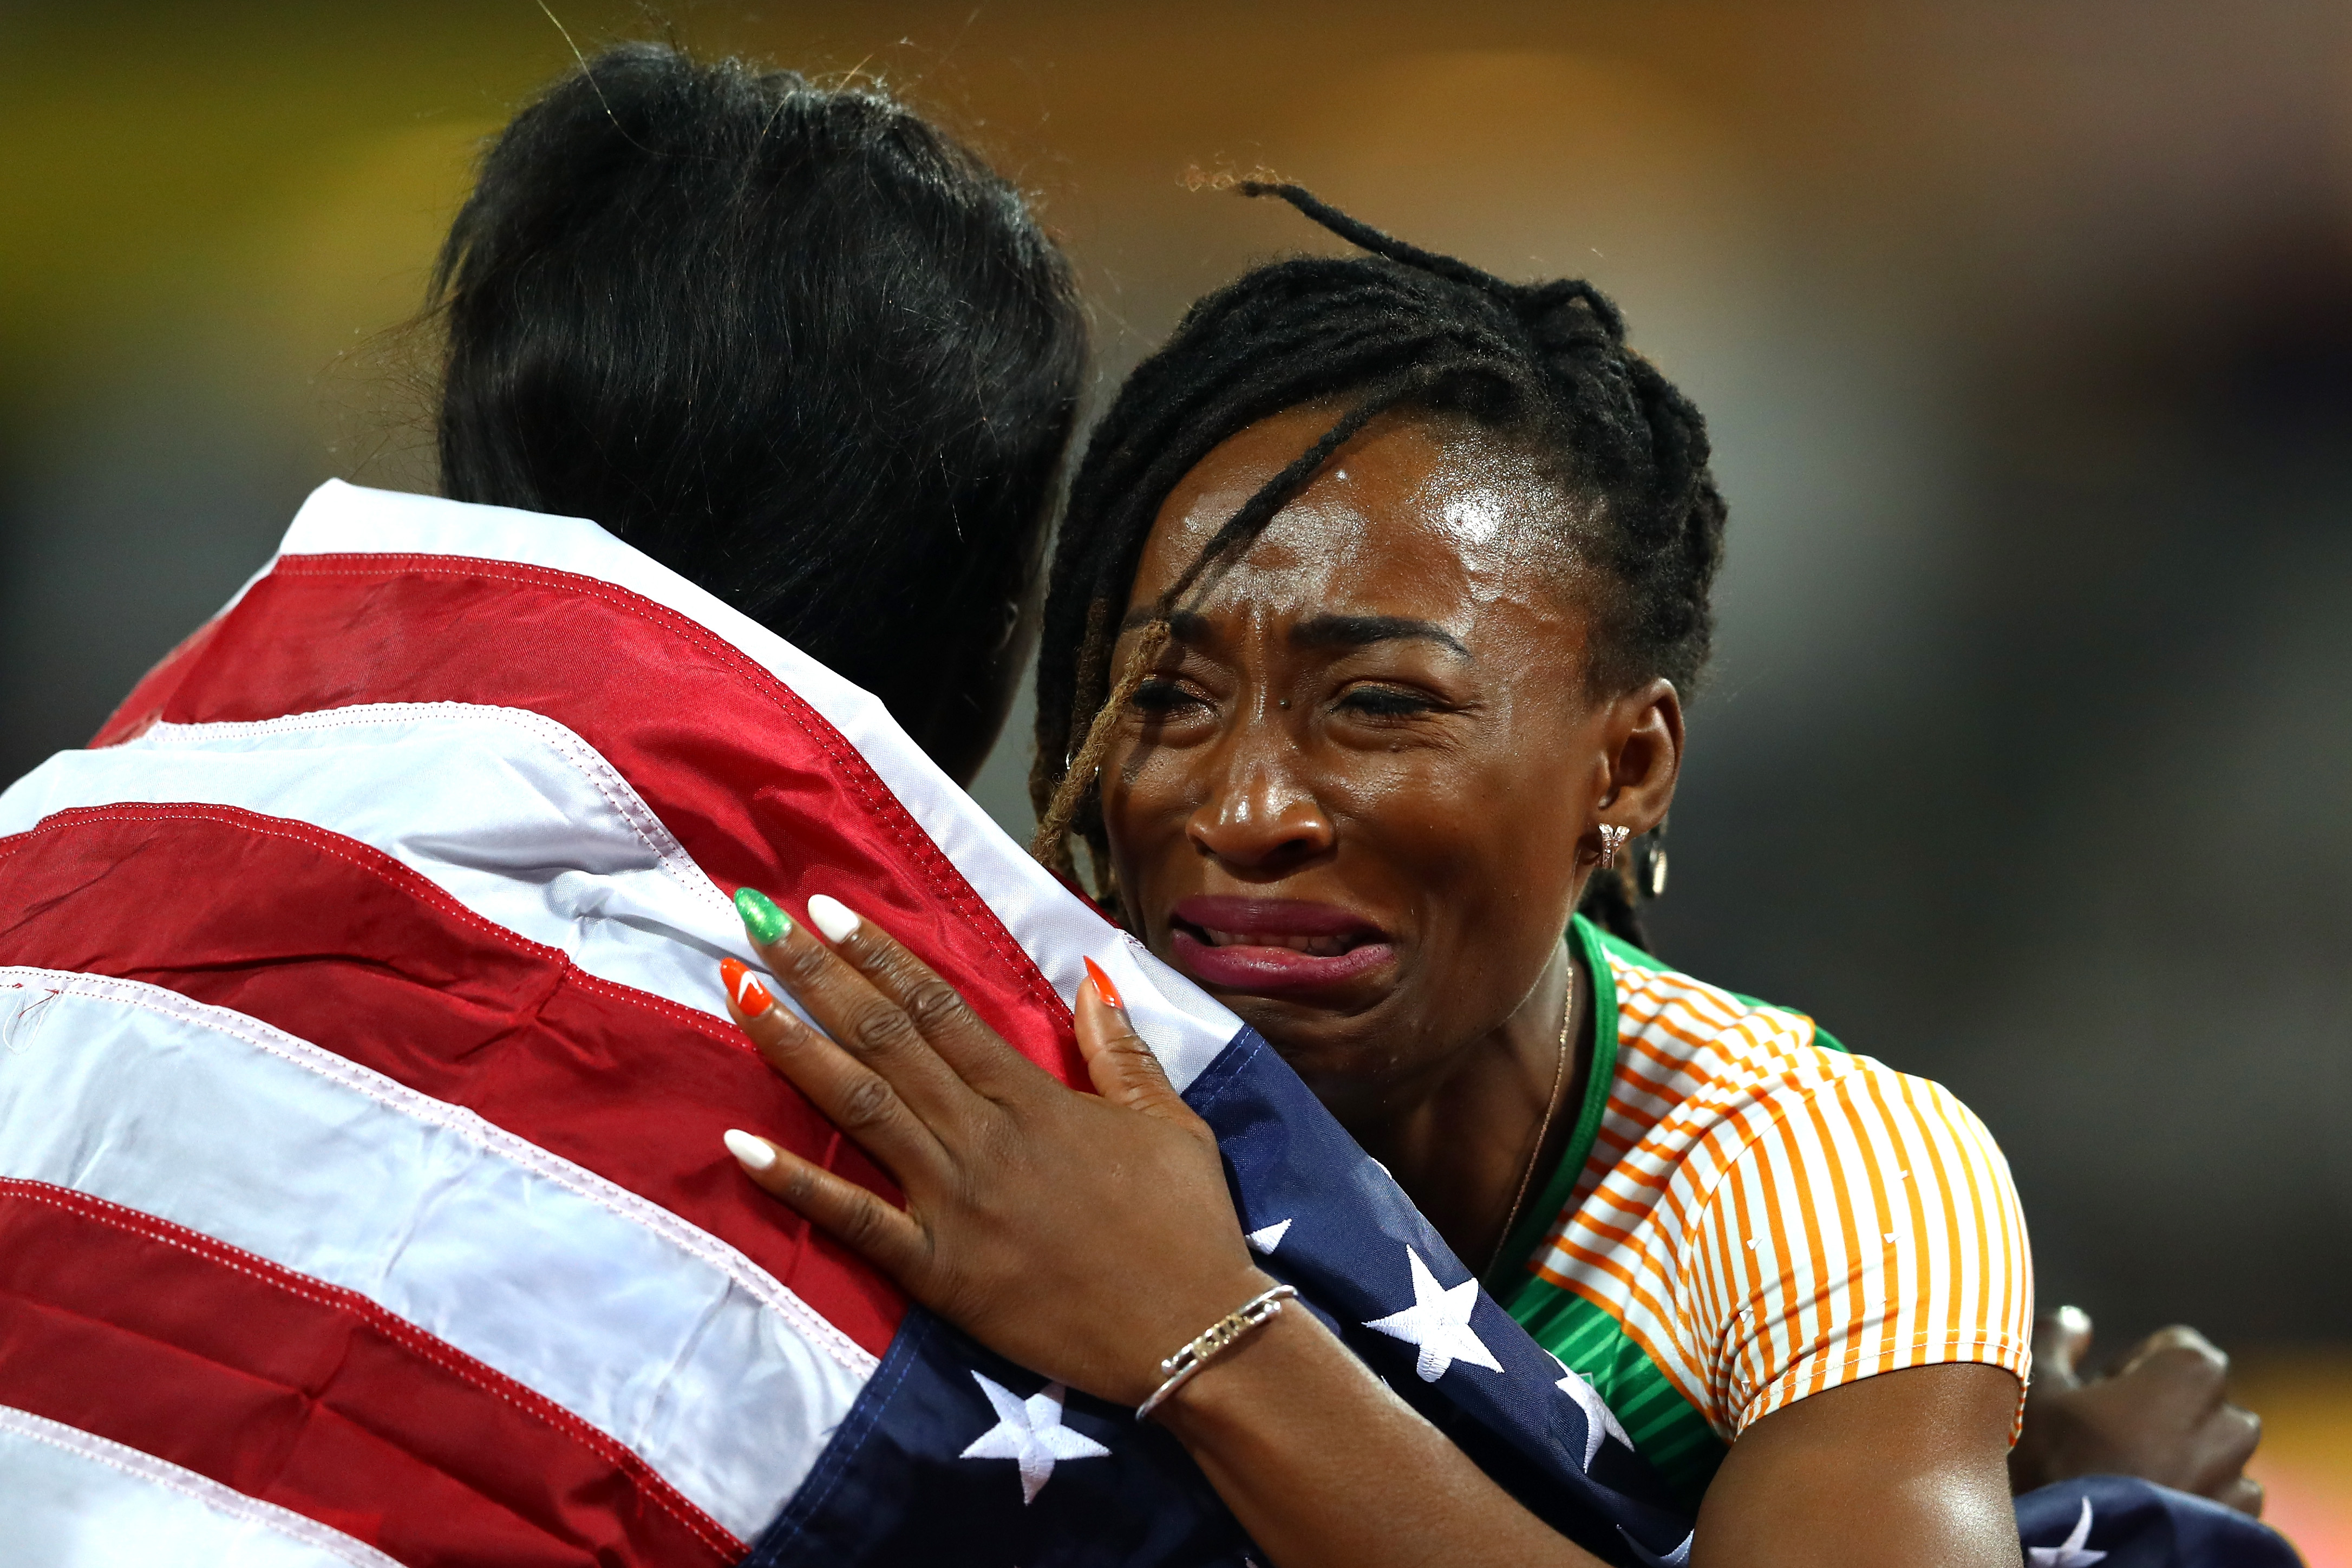 Tori Bowie of the United States, gold, celebrates with Marie-Josee Ta Lou of the Ivory Coast, silver, after the Women's 100 Metres Final during day three of the 16th IAAF World Athletics Championships at The London Stadium on August 6, 2017 in London, United Kingdom. | Source: Getty Images